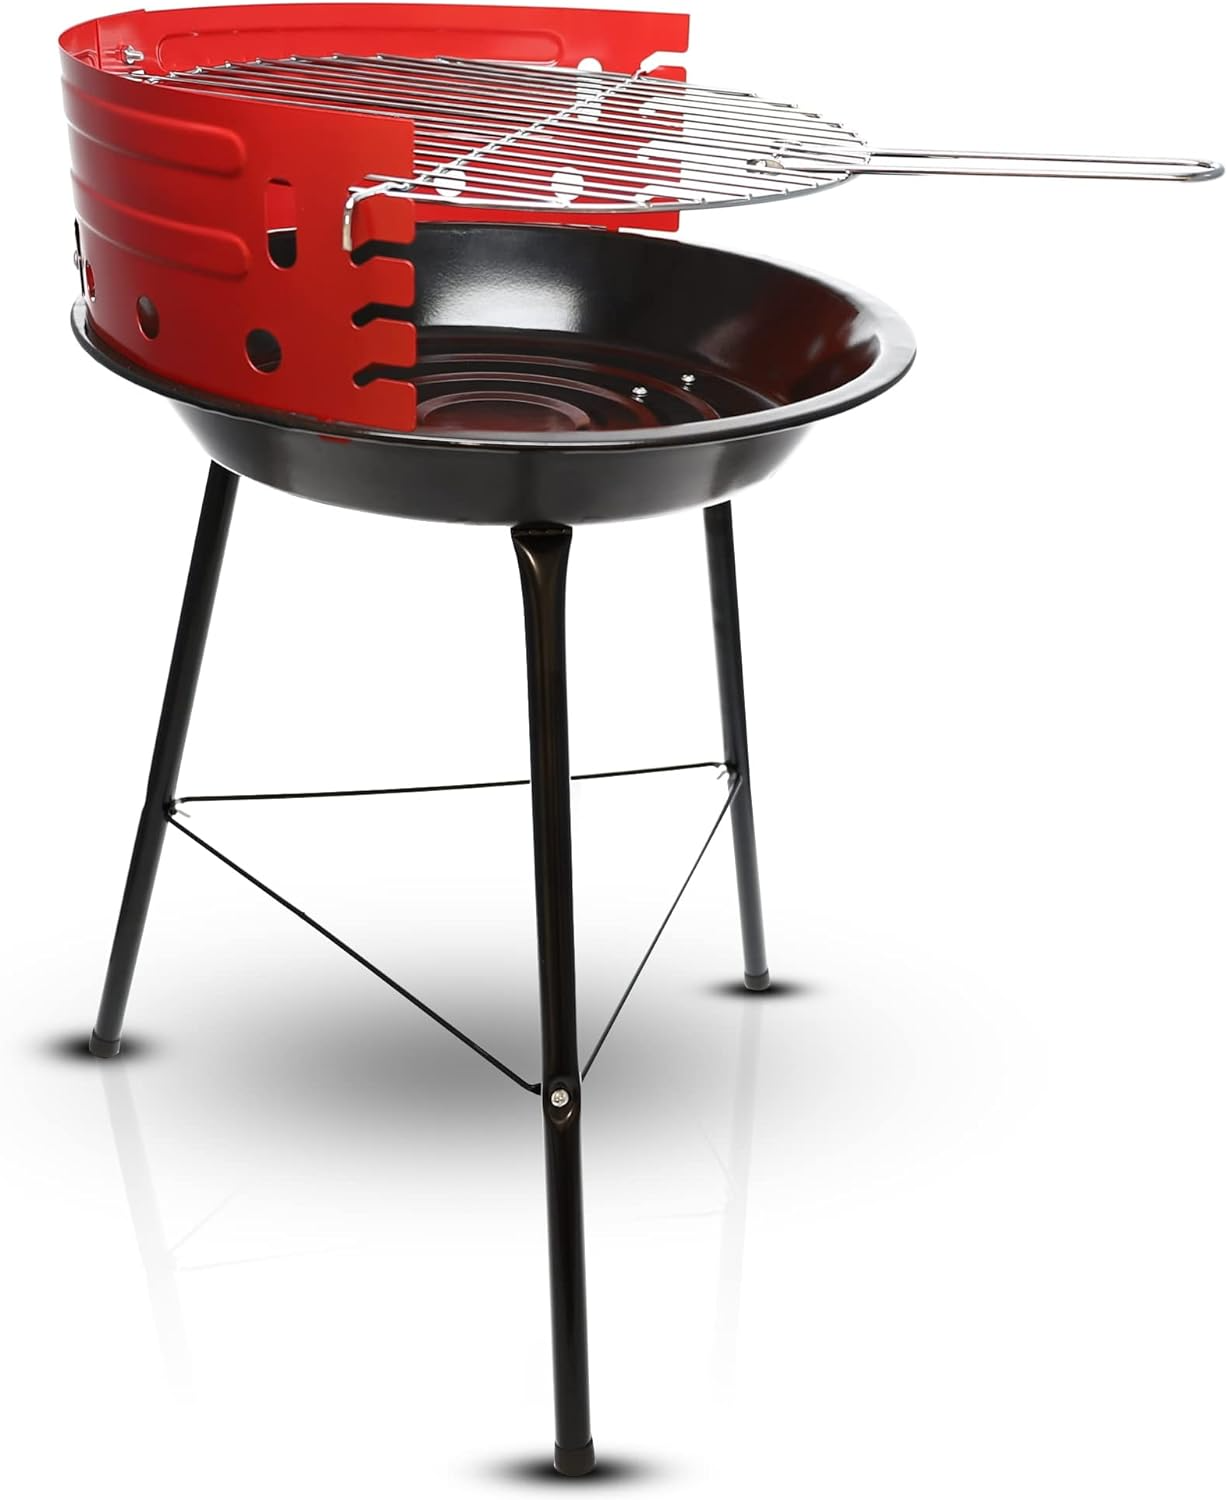 Gas One Charcoal Grill – 16-inch Portable Charcoal Grill – Barbecue Grill with 4 Levels for Flame Control – Dual Venting System – Small Charcoal Grill for Backyard, Camping, Boat - Barbecue Whizz...Watch My Smoke!